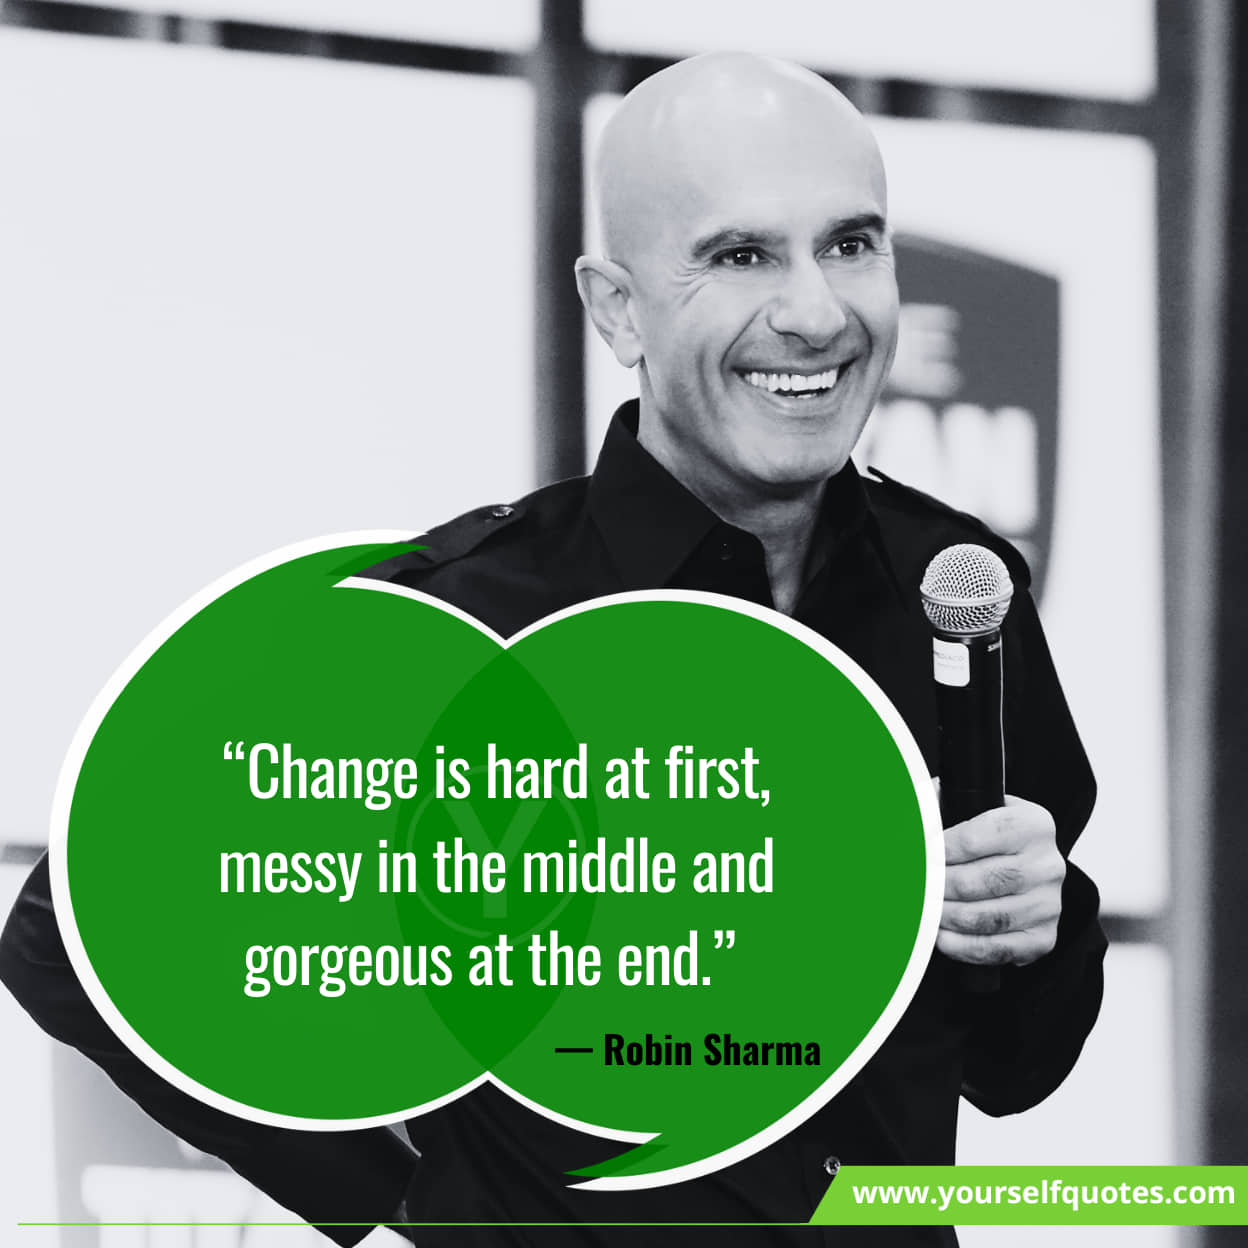 Inspirational Best Quotes About Change In Life